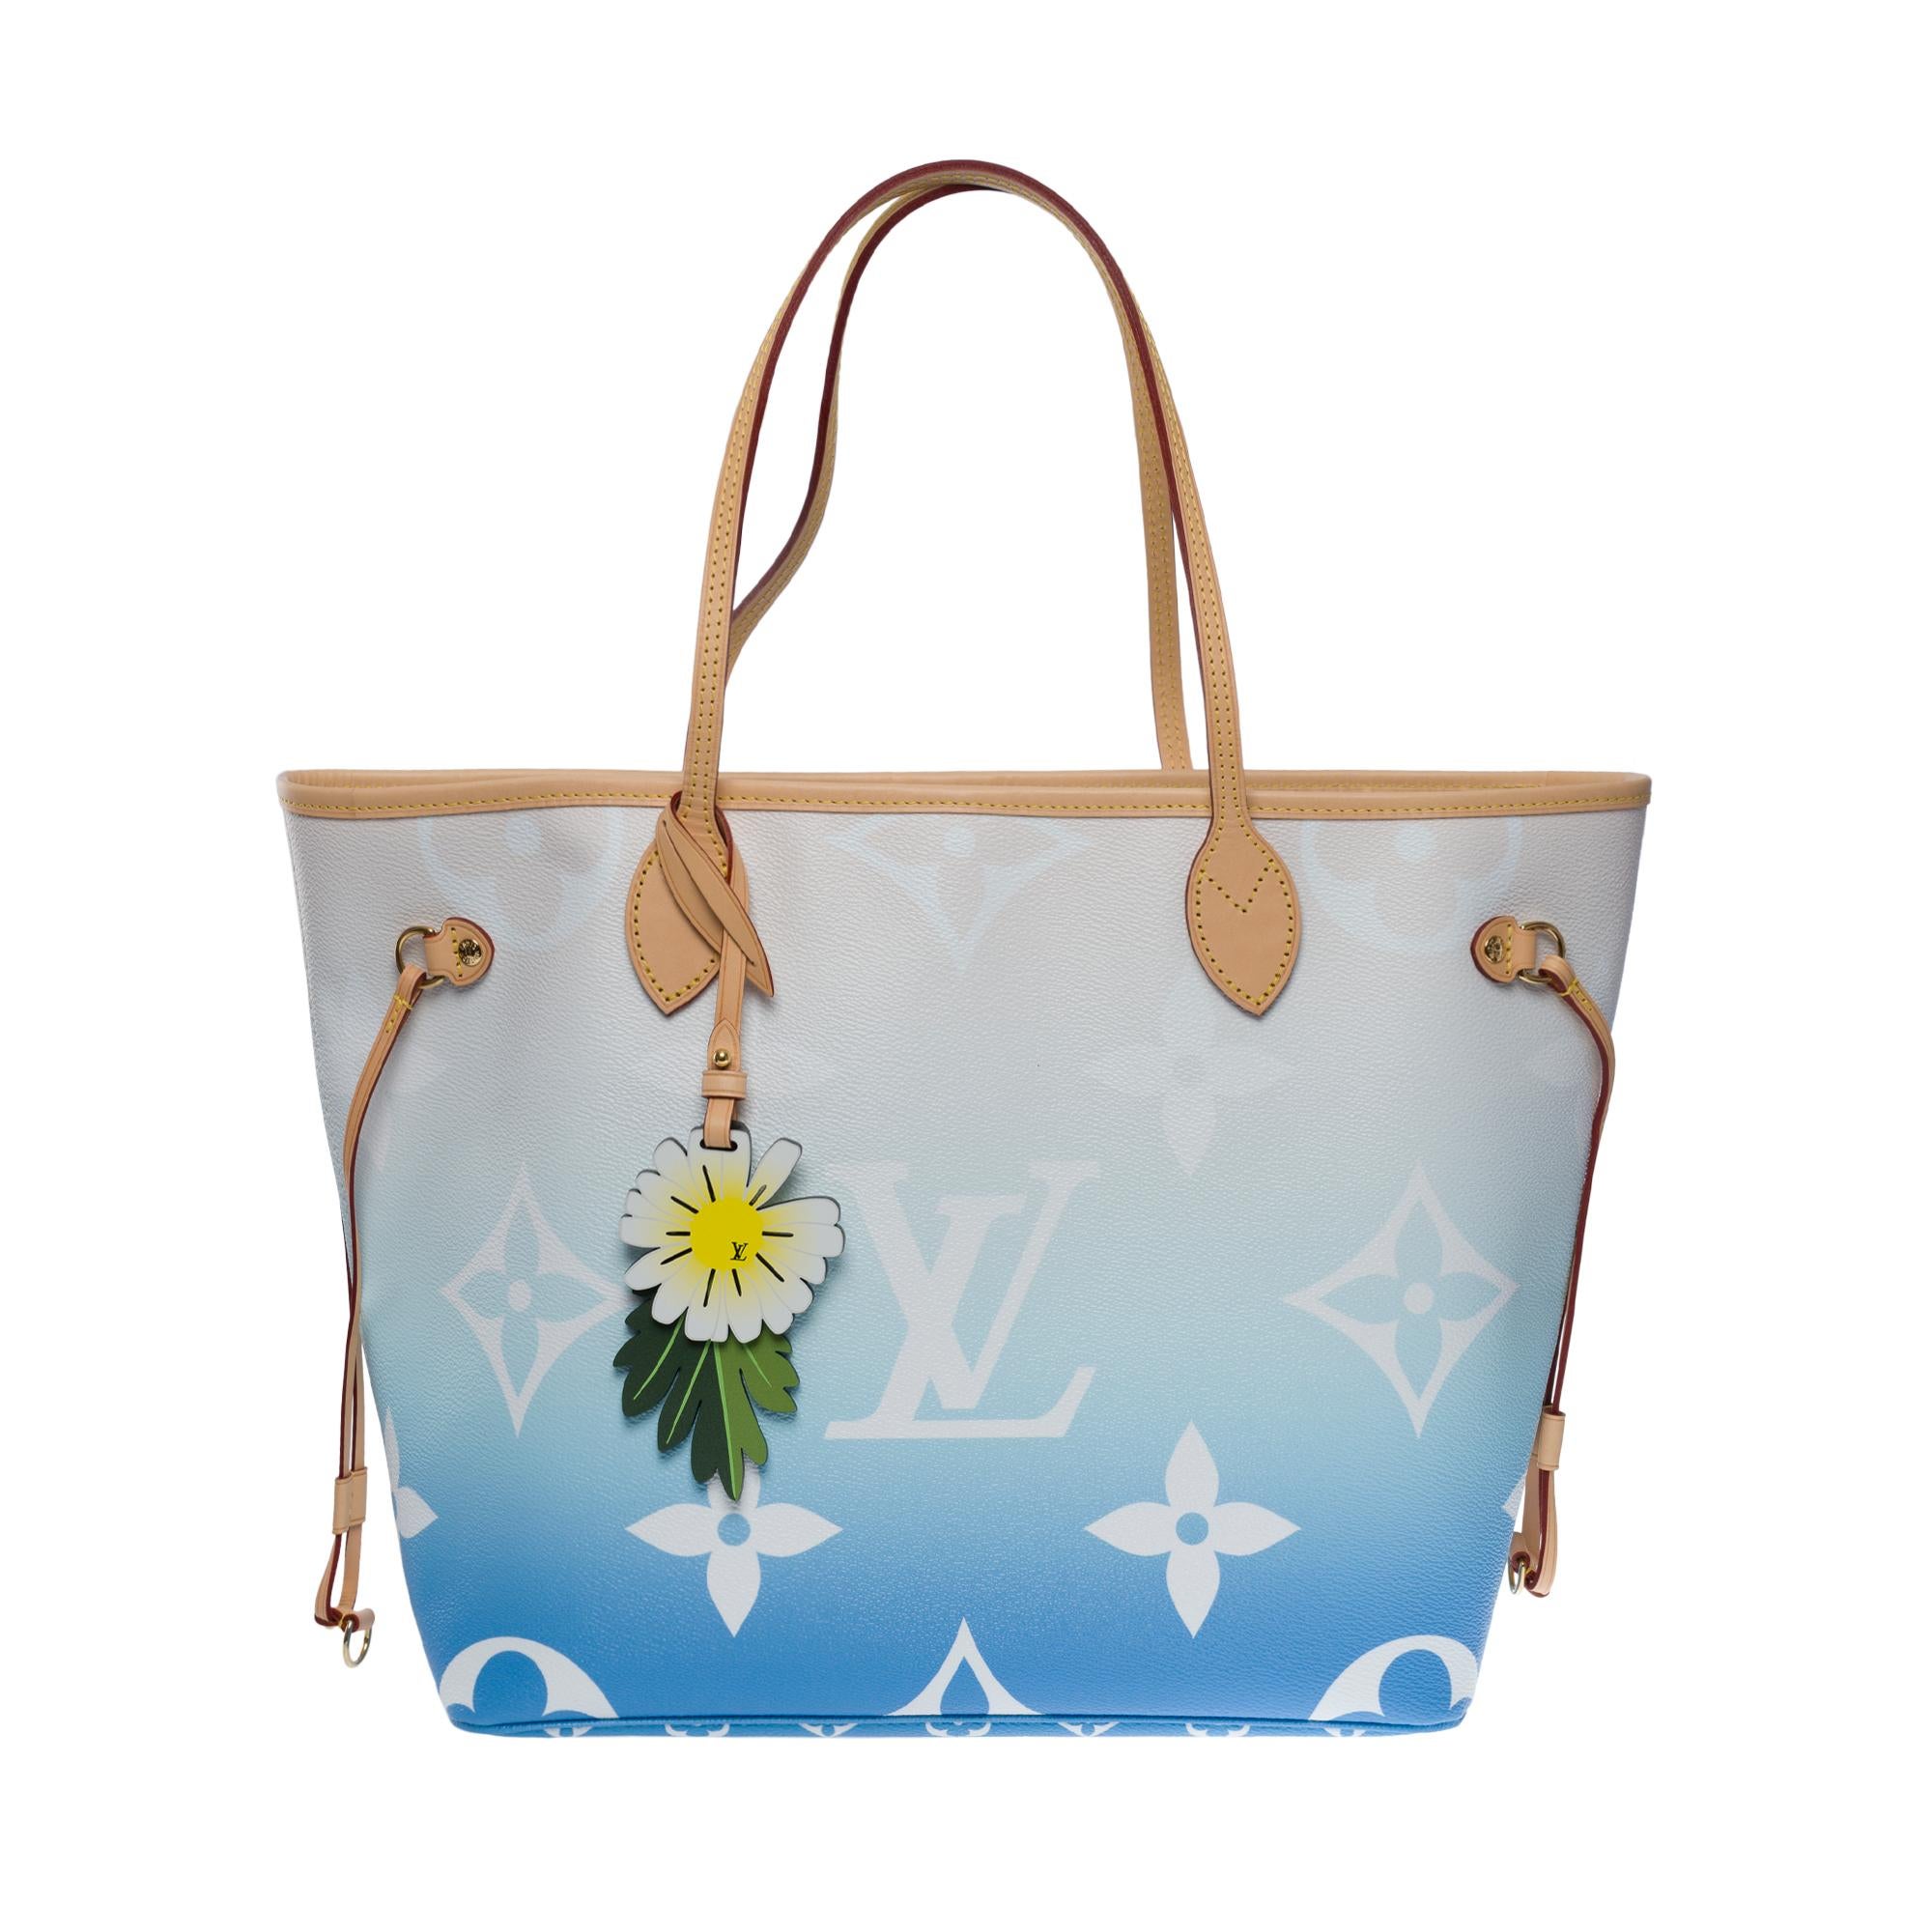 Stunning Louis Vuitton Neverfull MM By the Pool Limited Edition Tote bag in blue and white monogram canvas and natural leather, gold metal hardware, Double Handle in natural leather

Clamp closure and carabiner closure
Inner lining in striped beige